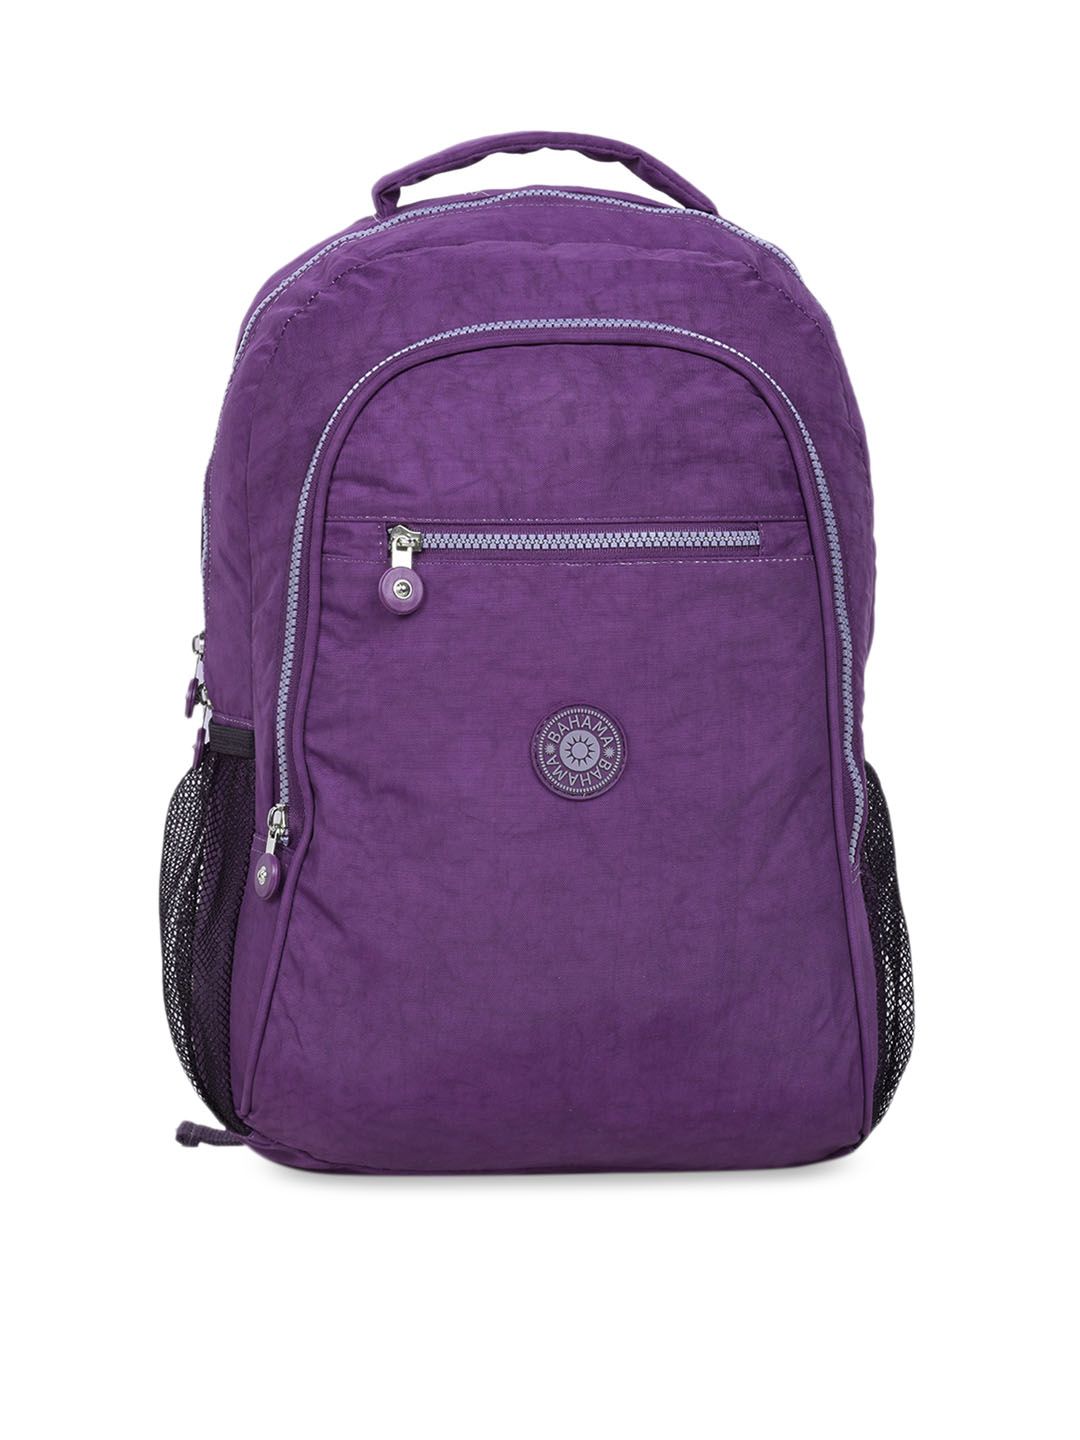 BAHAMA Crinkle Unisex Purple Solid Backpack Price in India